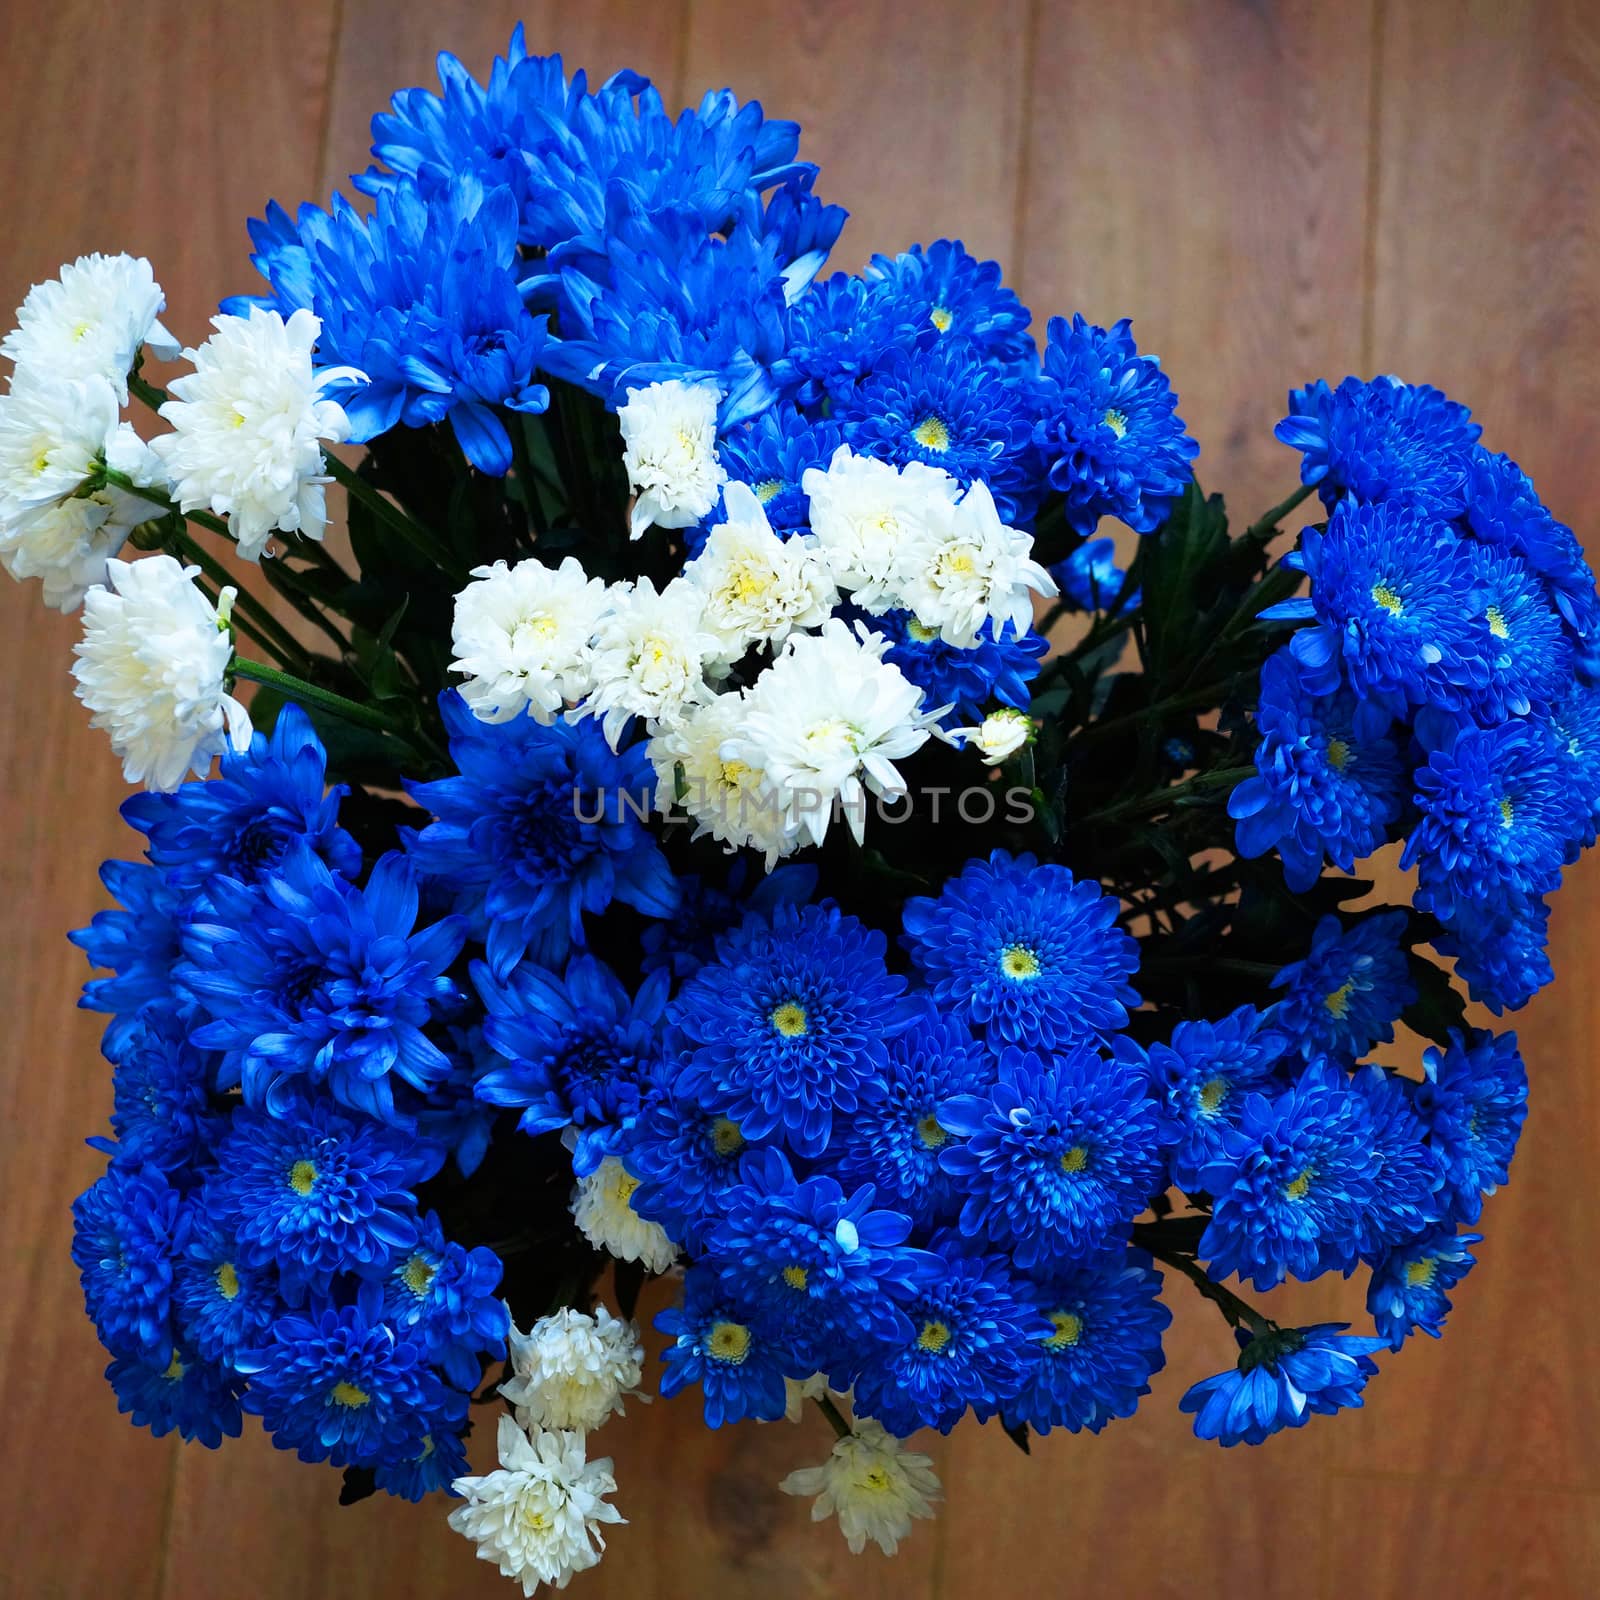 blue and white chrysanthemums on wooden background, top view by Annado